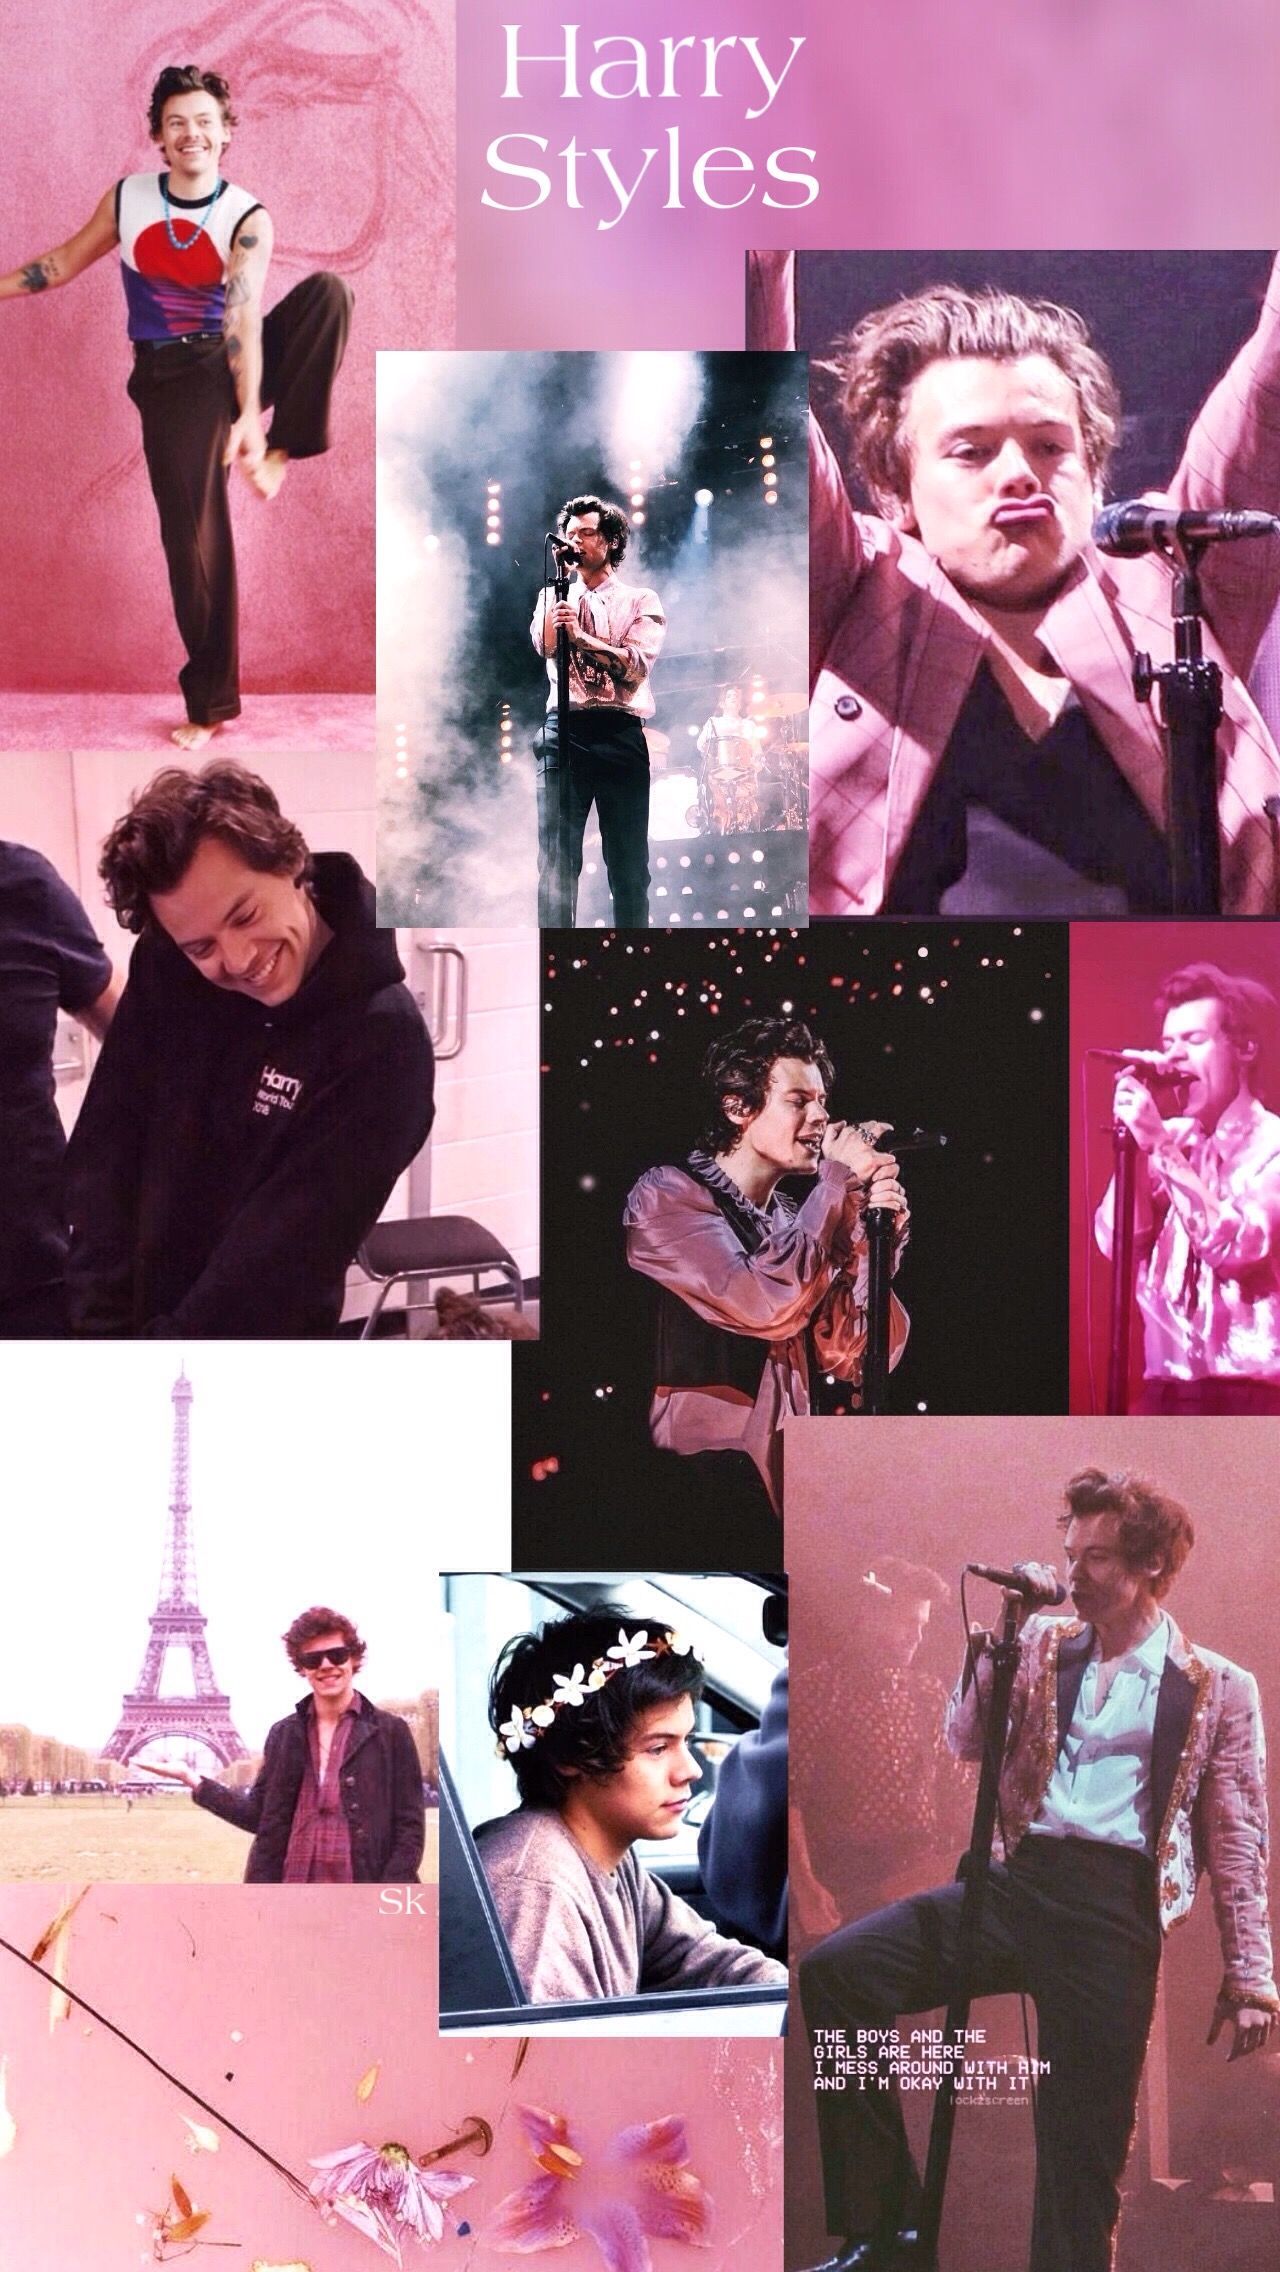 Harry Styles wallpaper collage #harry #harrystyles #wallpaper #iphone #B&W # styles #harrysty. Harry styles photo, Harry styles lockscreen, Harry styles wallpaper